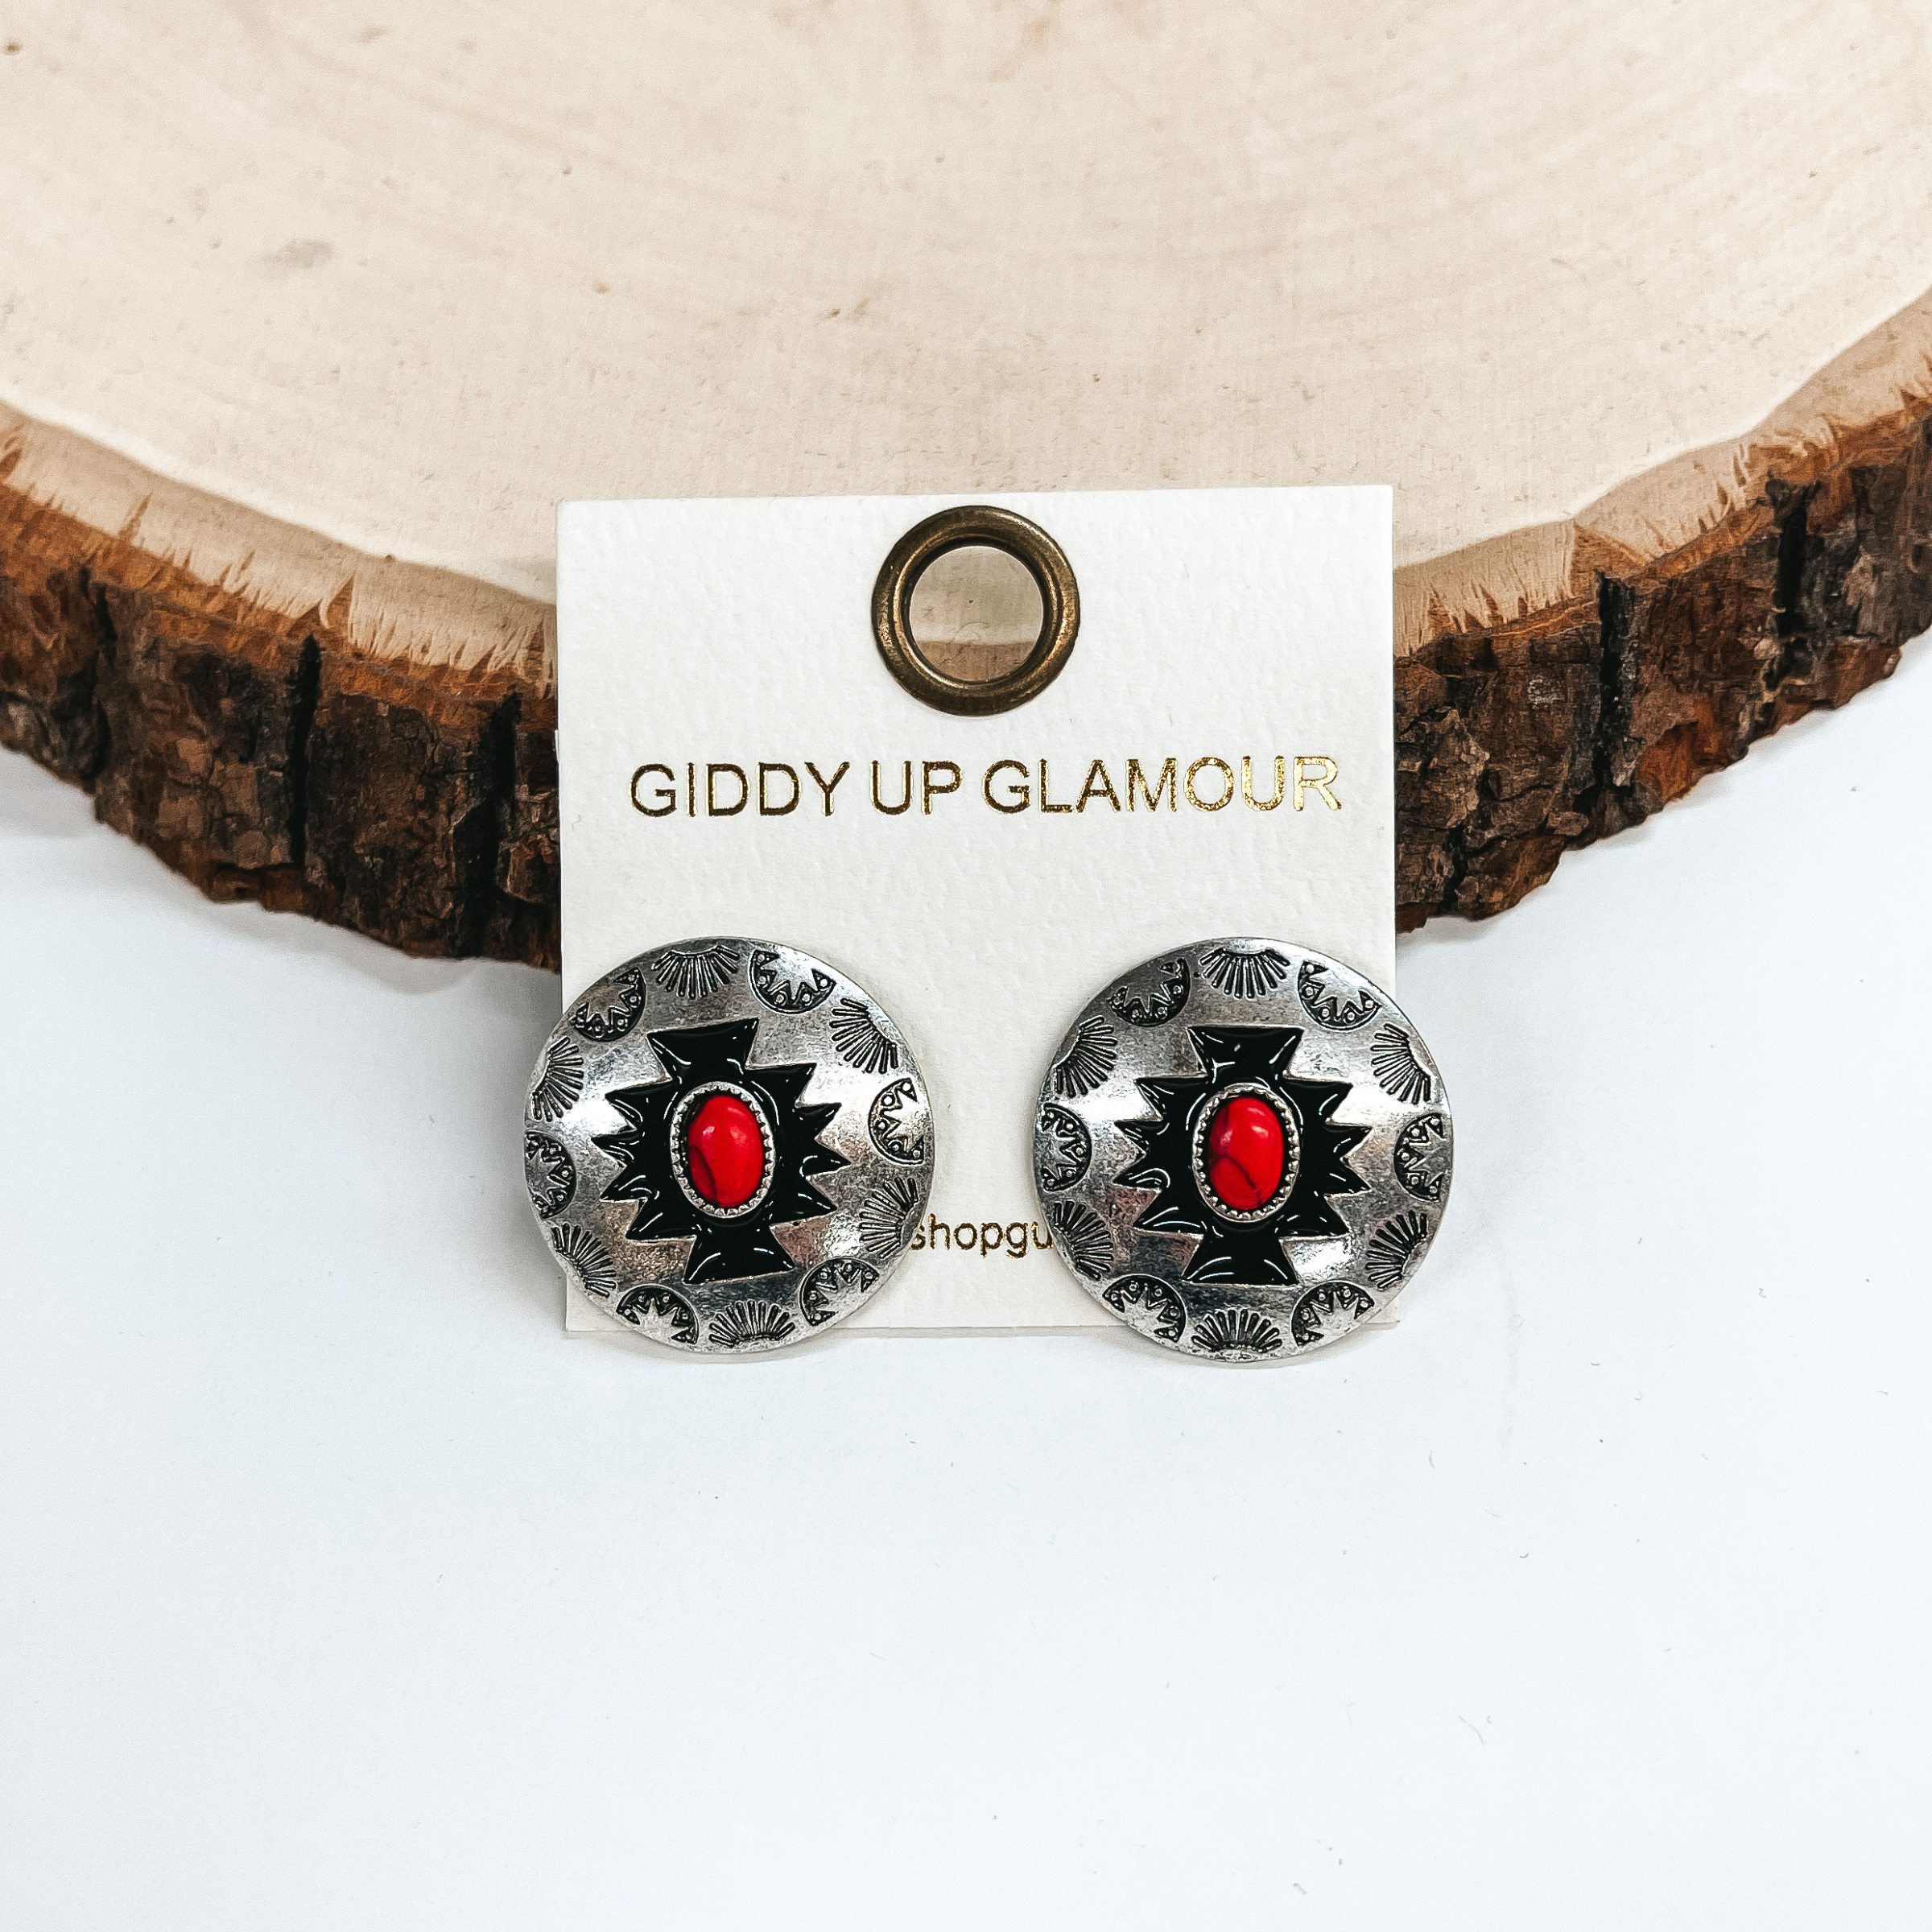 These are silver circle post back earrings with  aztec design and a stone in the center, the stone  is red. These earrings are taken on a white  background and leaned up against a slab of wood.